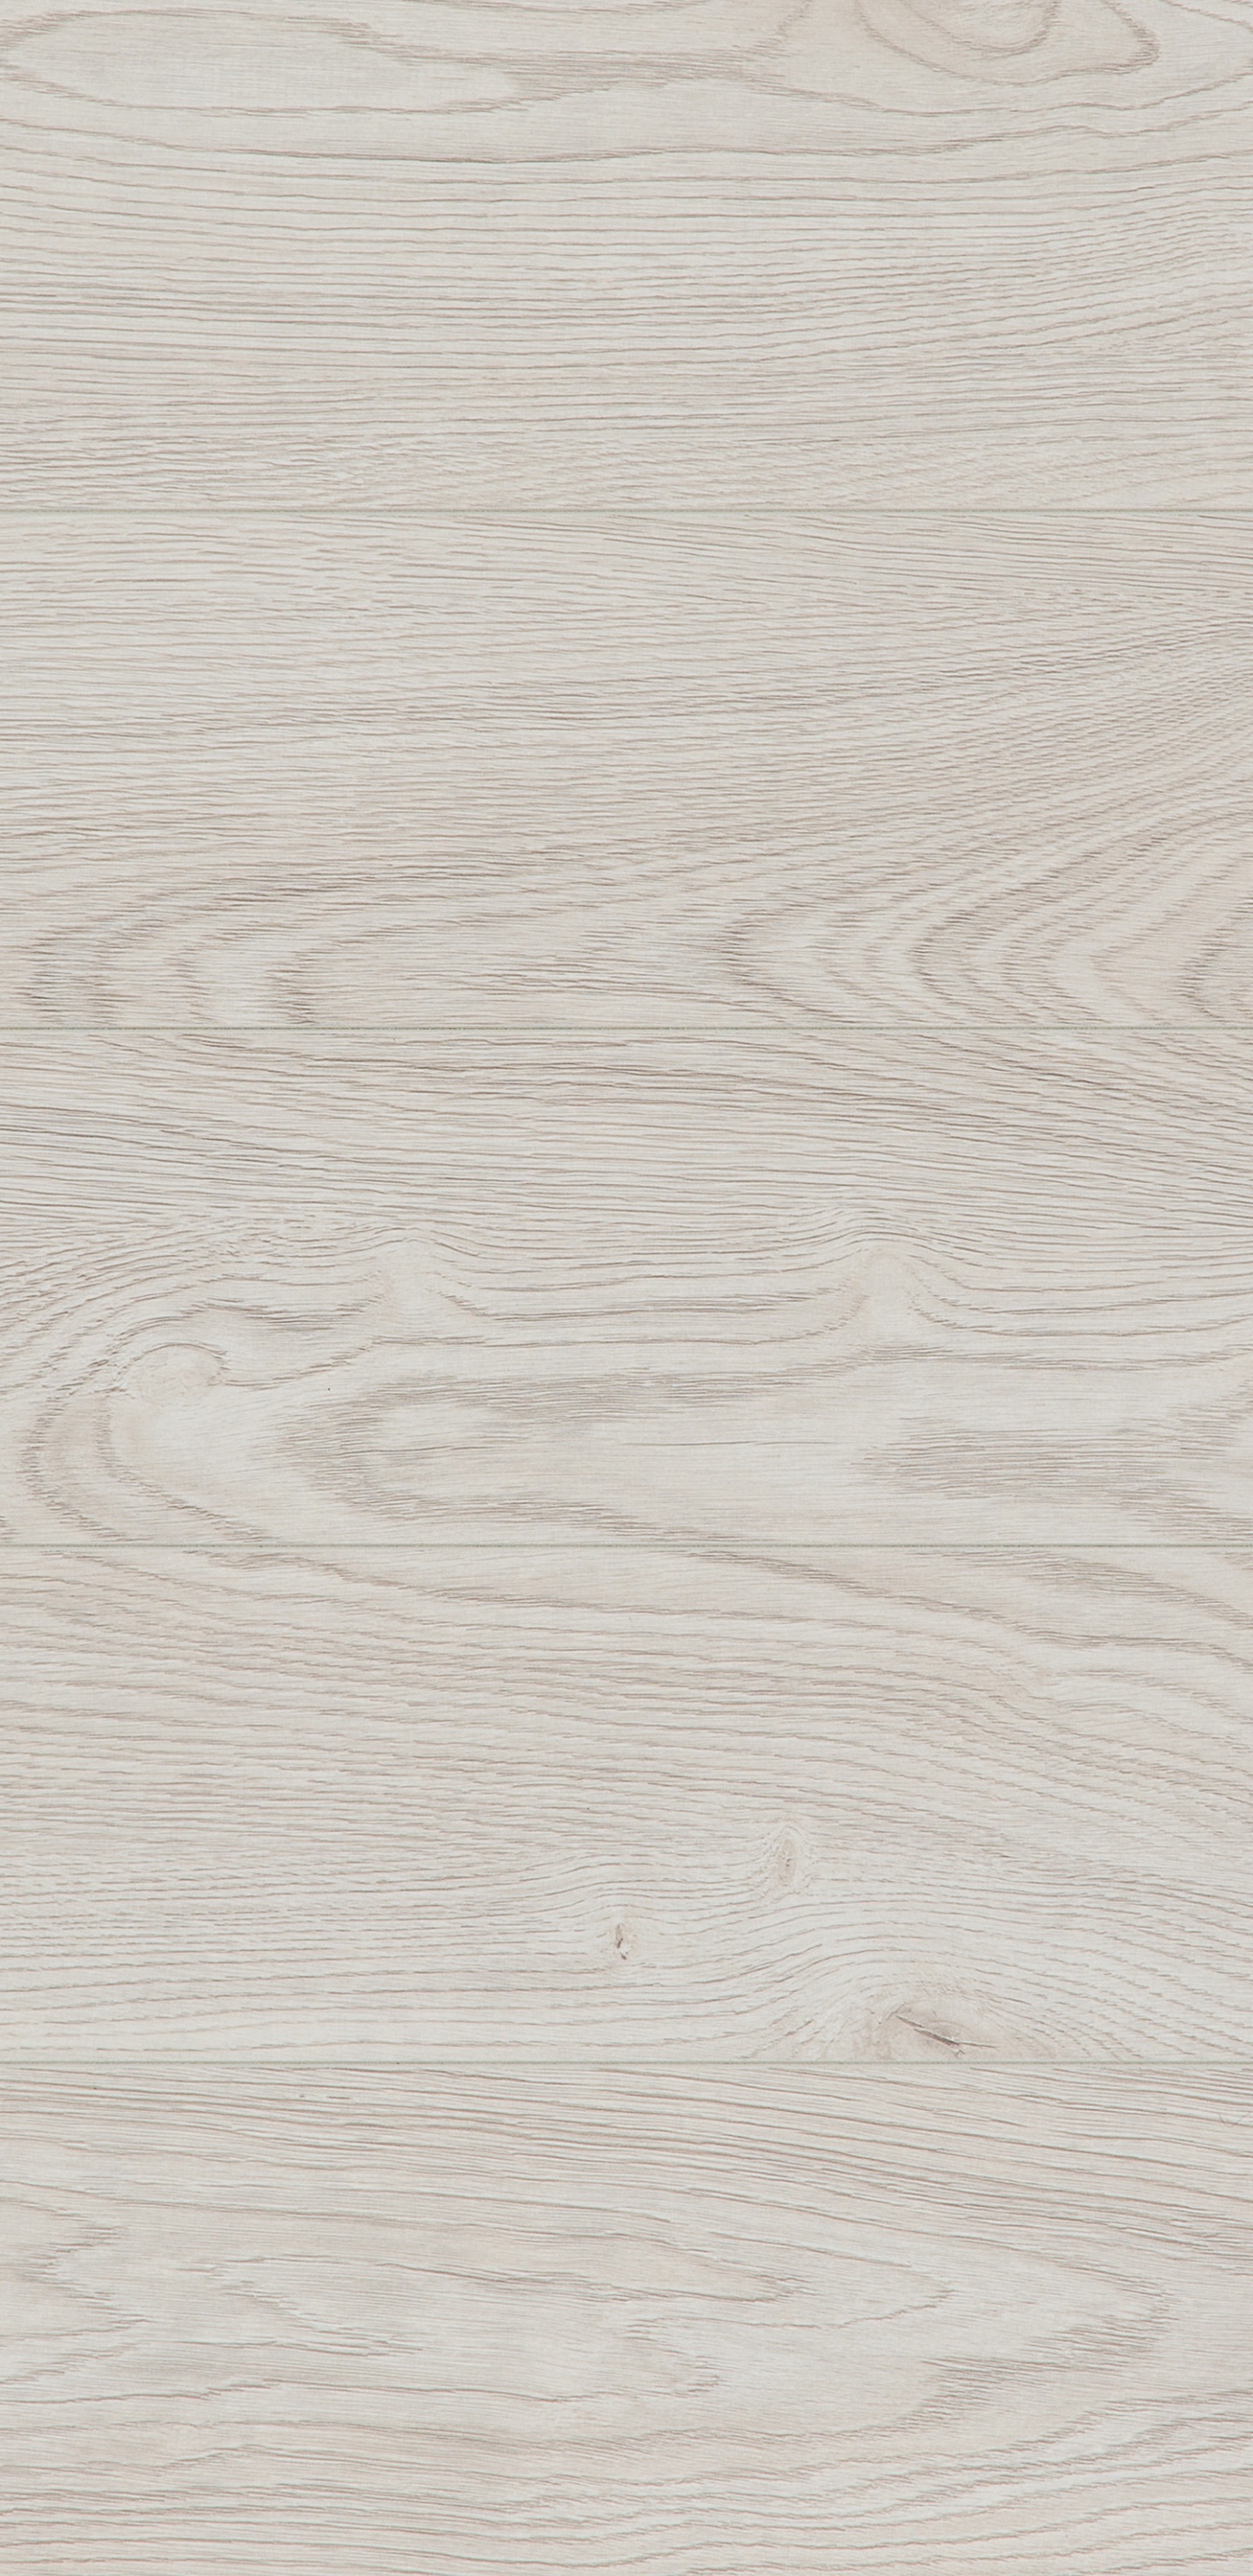 White and Brown Wooden Surface. Wallpaper in 1440x2960 Resolution